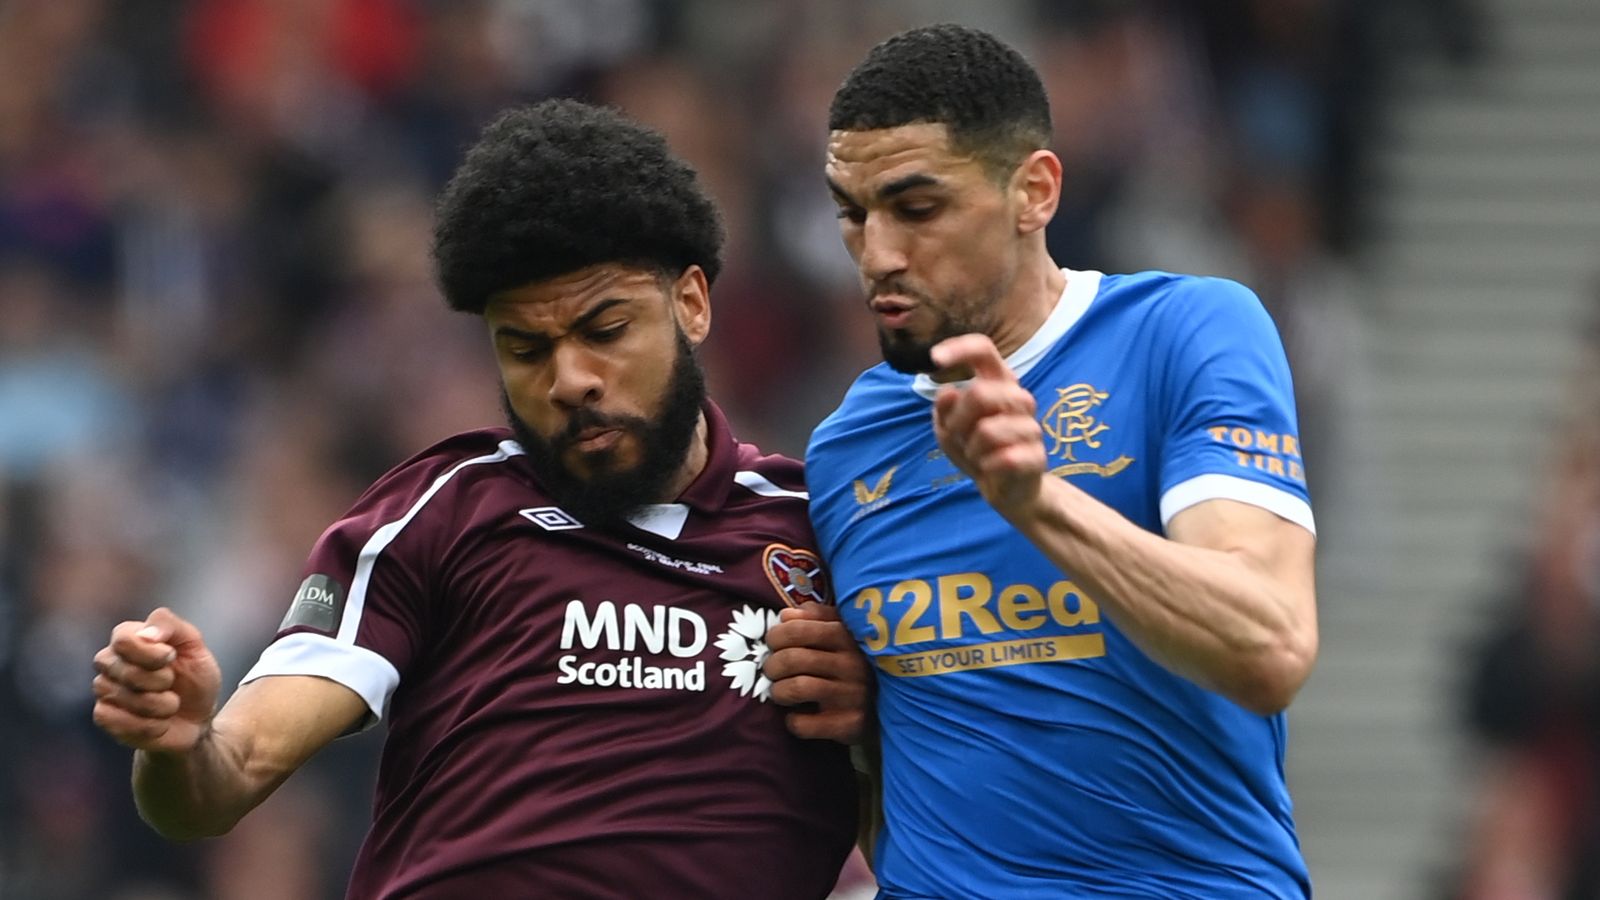 Rangers excused from cinch sponsorship deal after Scottish Professional Football League agrees new terms